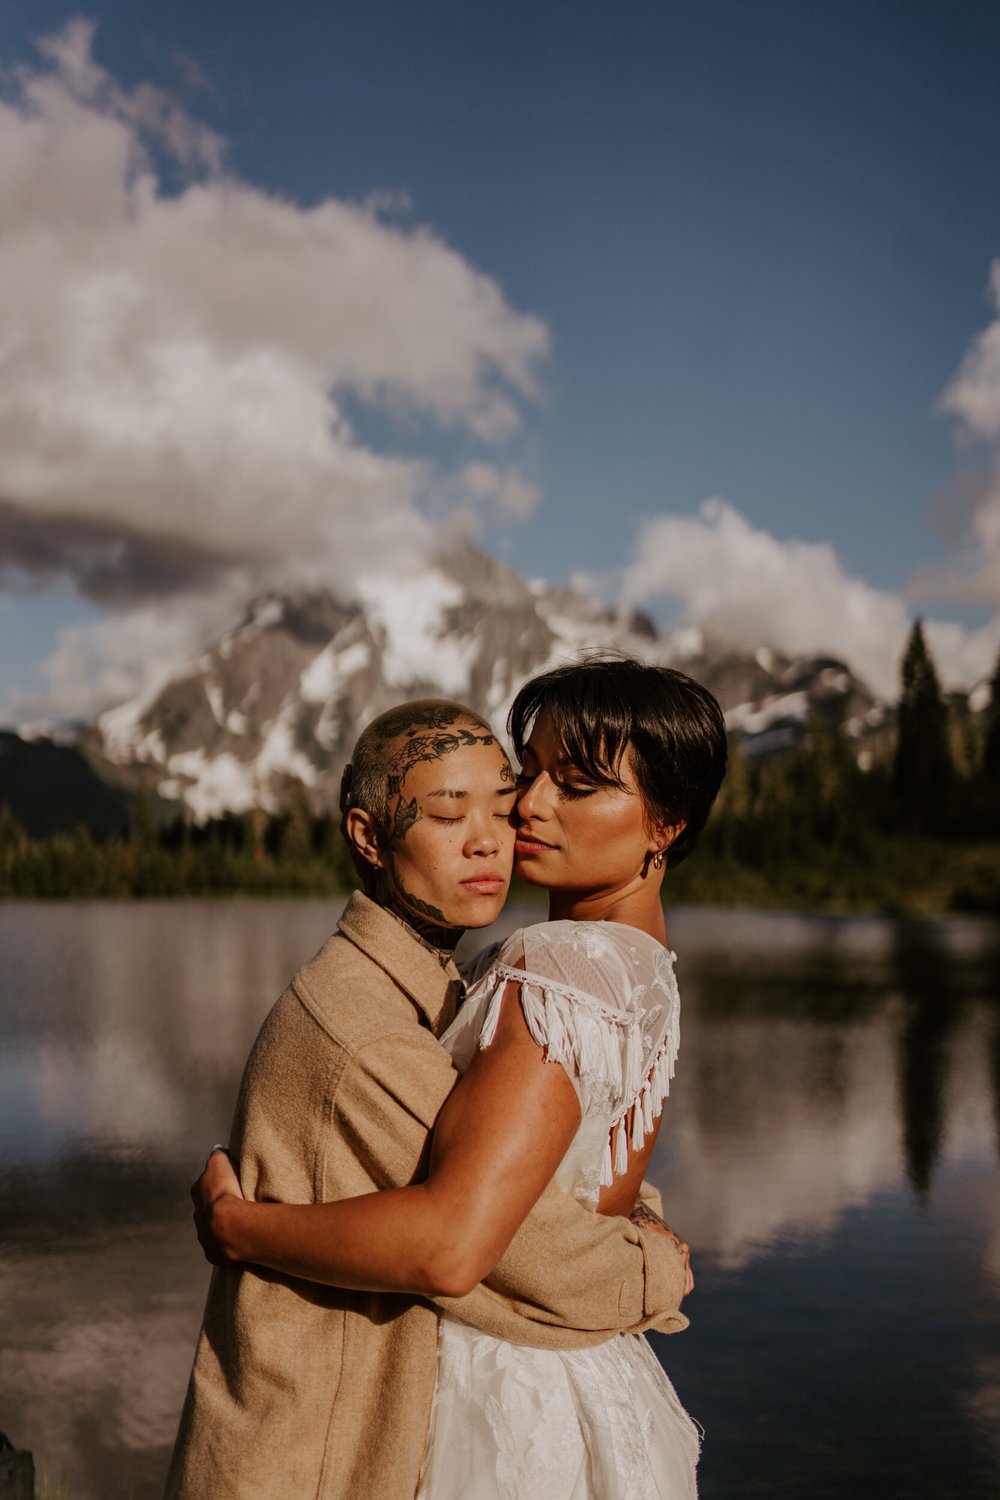 North Cascades National Park Elopement at Picture Lake, Pacific Northwest Elopement, Washington Elopement, Photography by Tida Svy | www.tidasvy.com